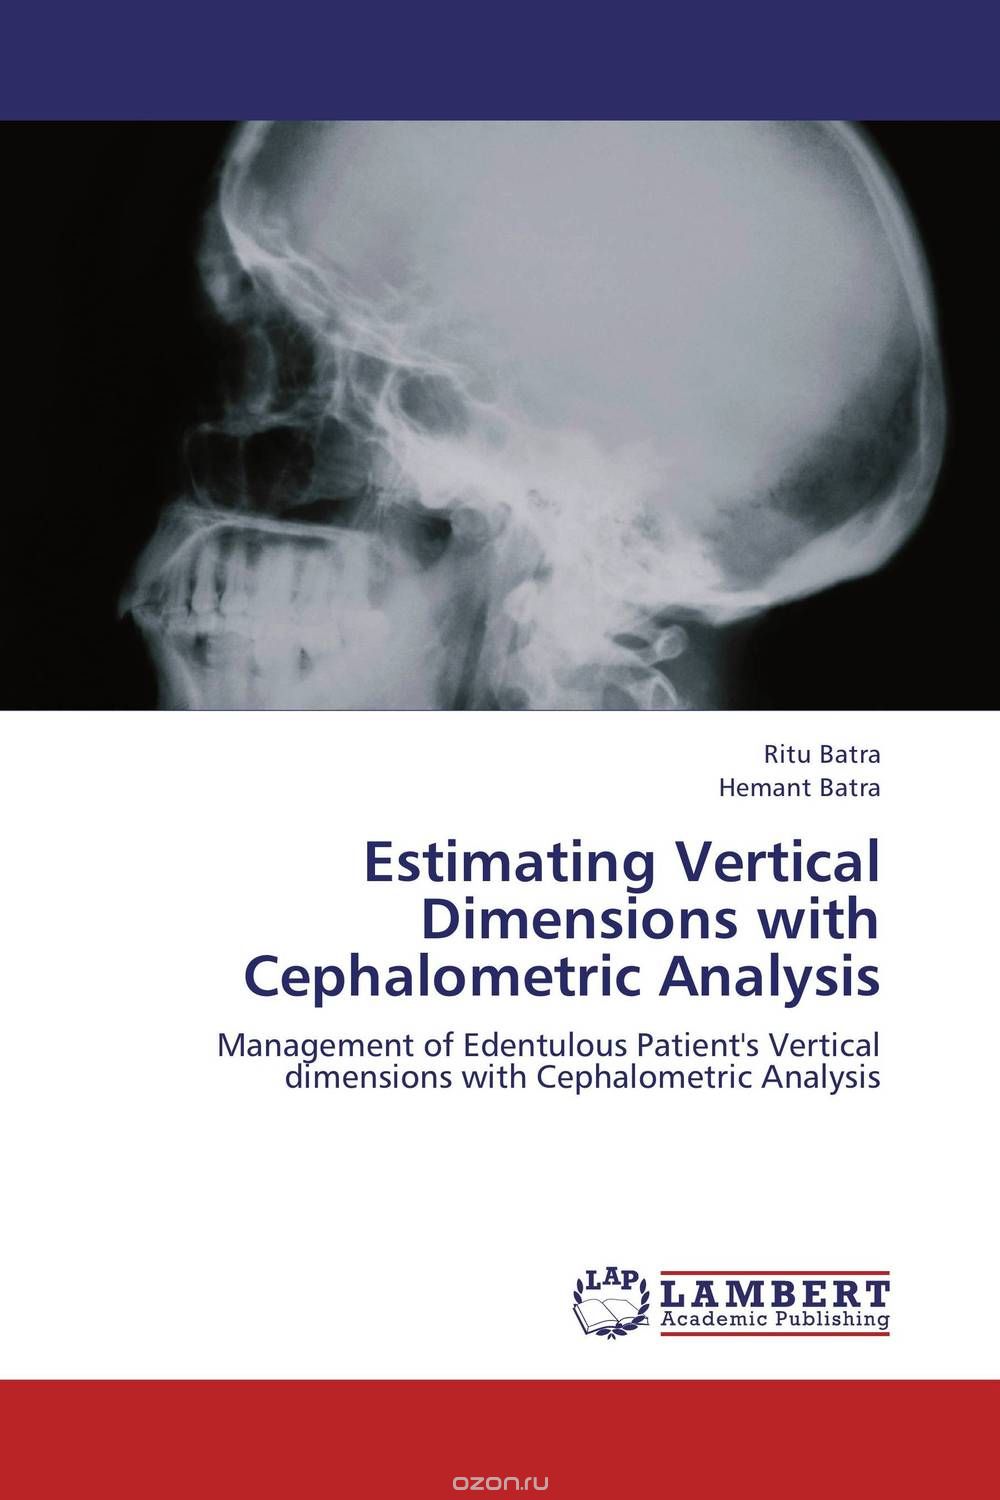 Estimating Vertical Dimensions  with Cephalometric Analysis